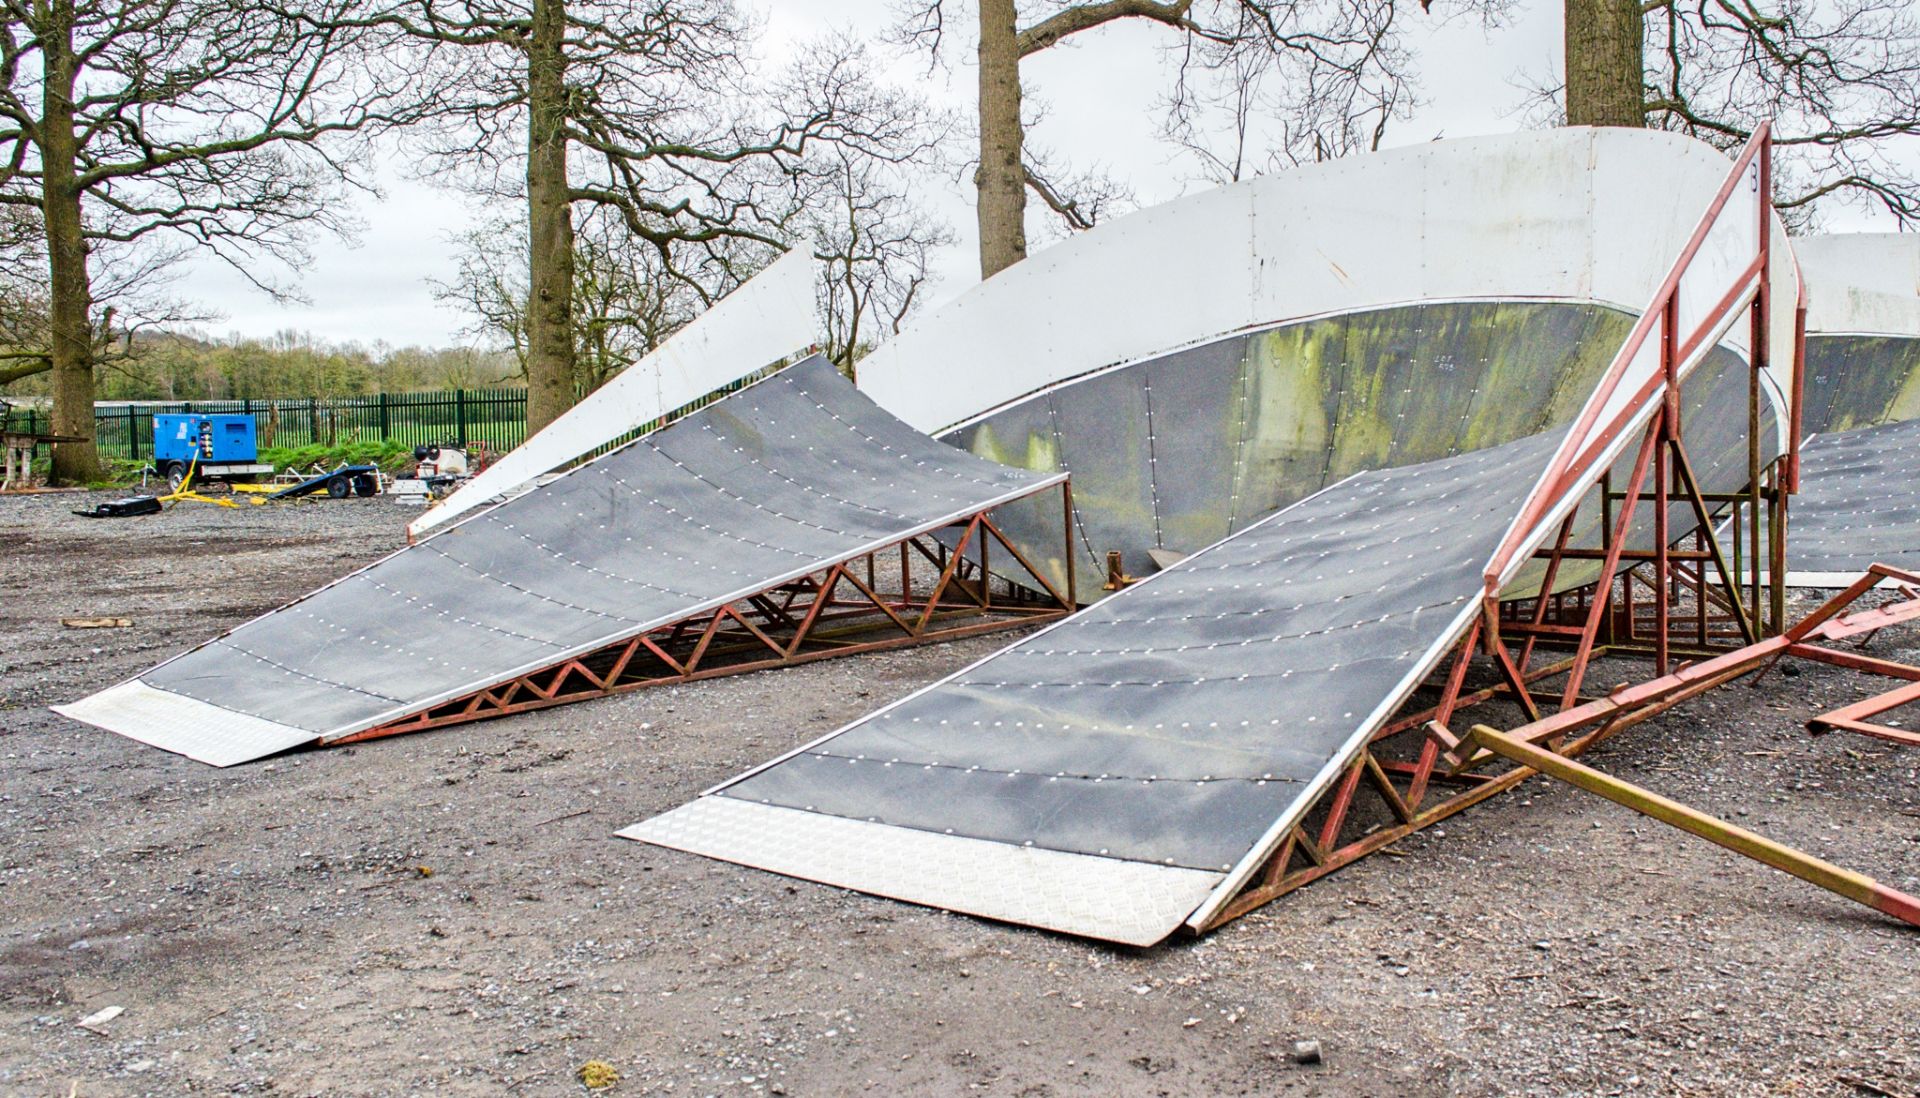 BMX/Skateboard ramp Comprising of: 3 sections Overall size approximately 20 ft deep x 16 ft wide